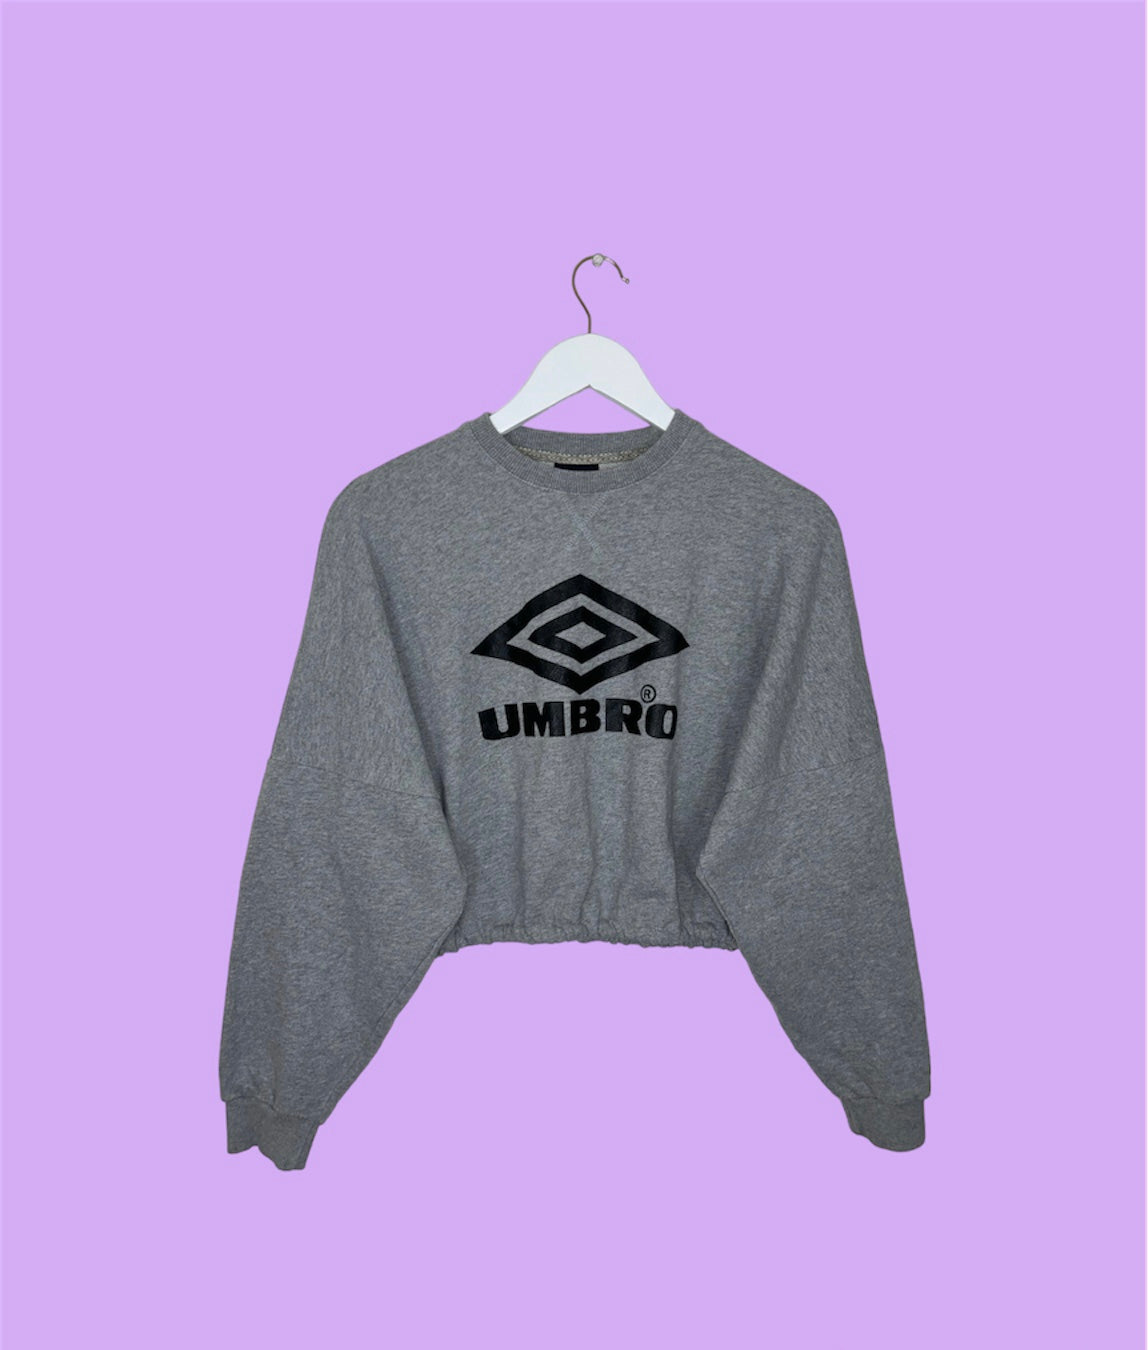 light grey cropped sweatshirt with black umbro logo shown on a lilac background